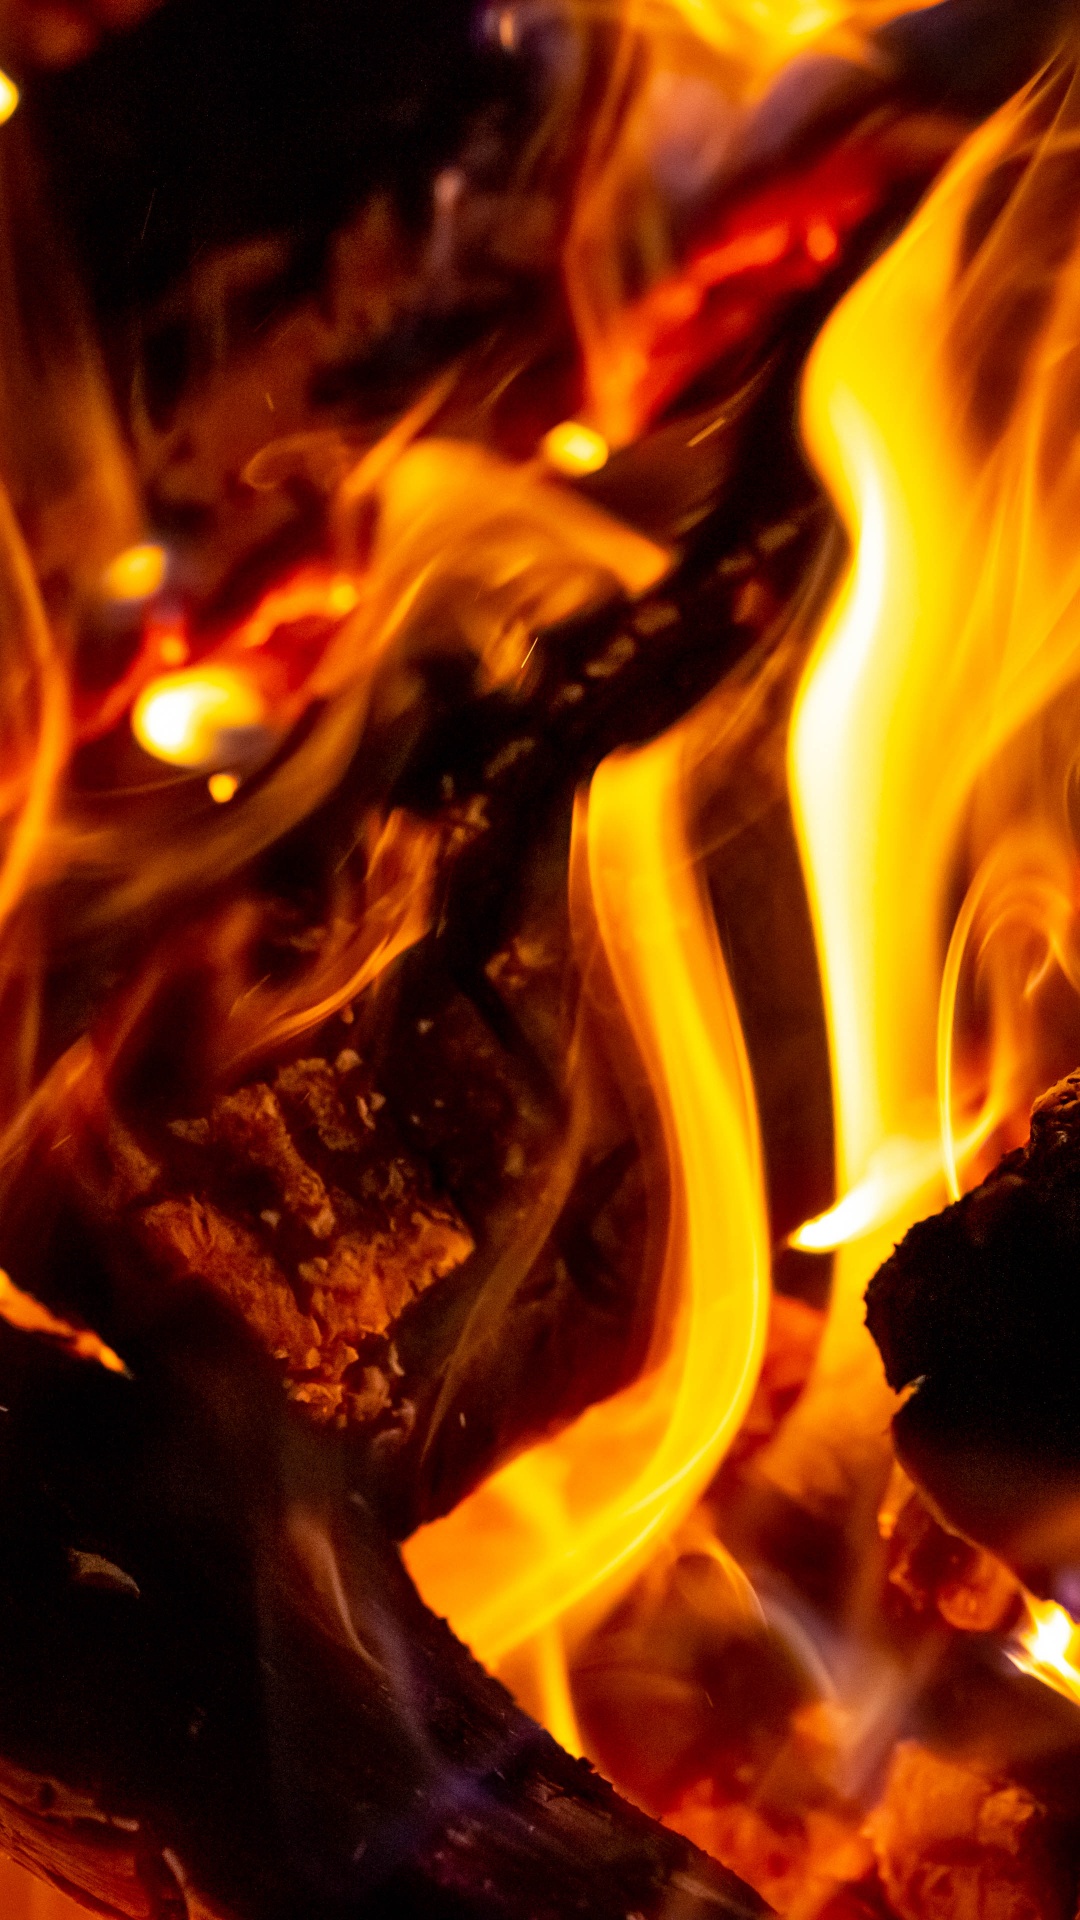 Orange and Black Fire in Close up Photography. Wallpaper in 1080x1920 Resolution